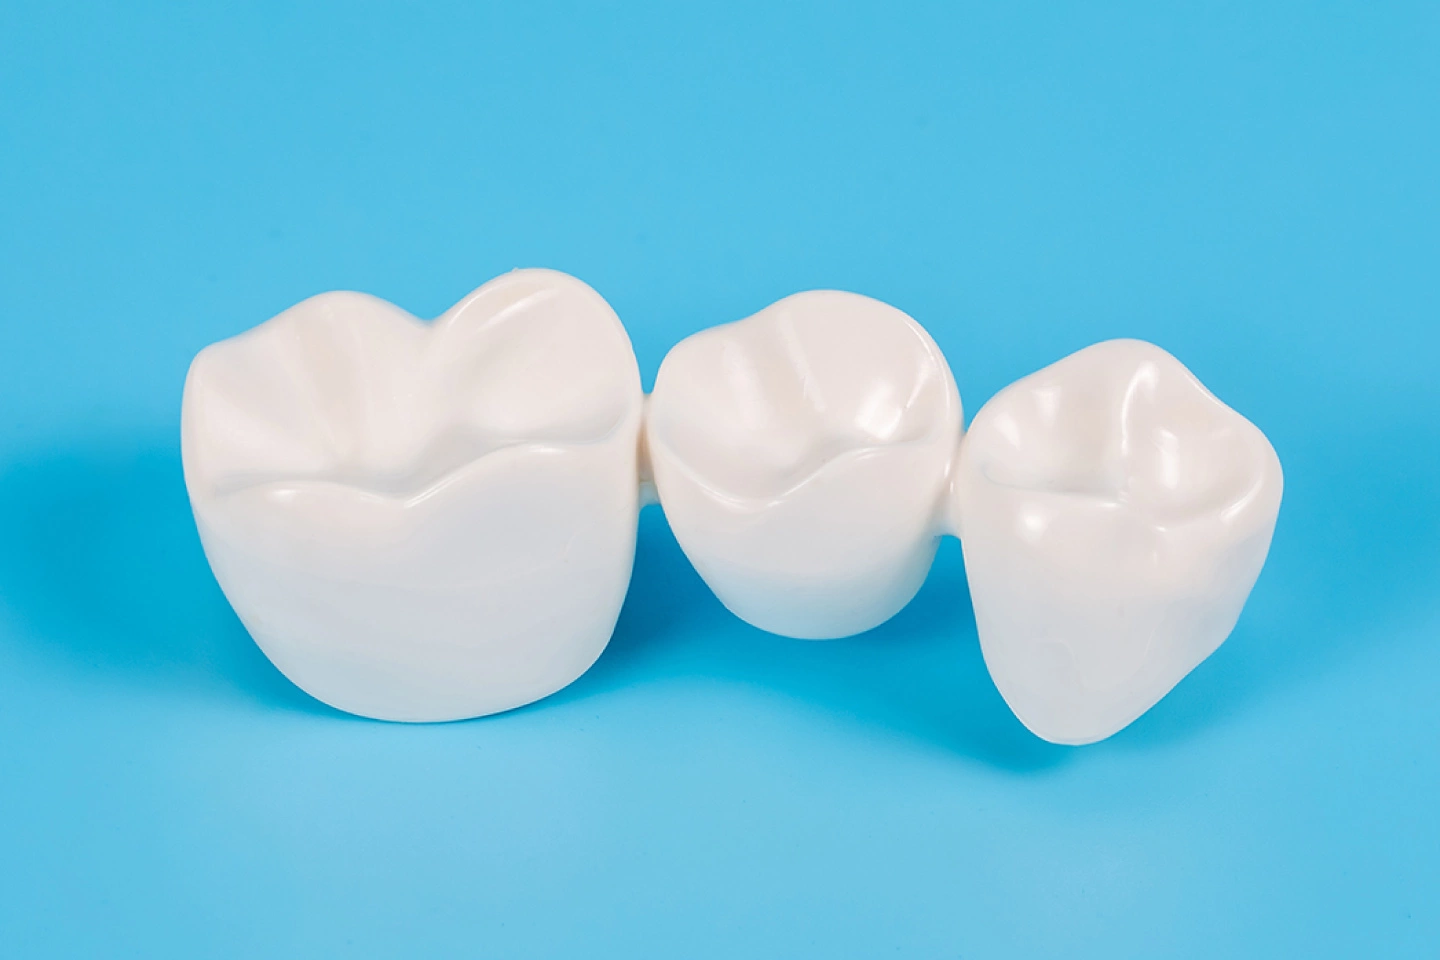 Improve Your Smile with Porcelain Crowns at IM Dentistry.